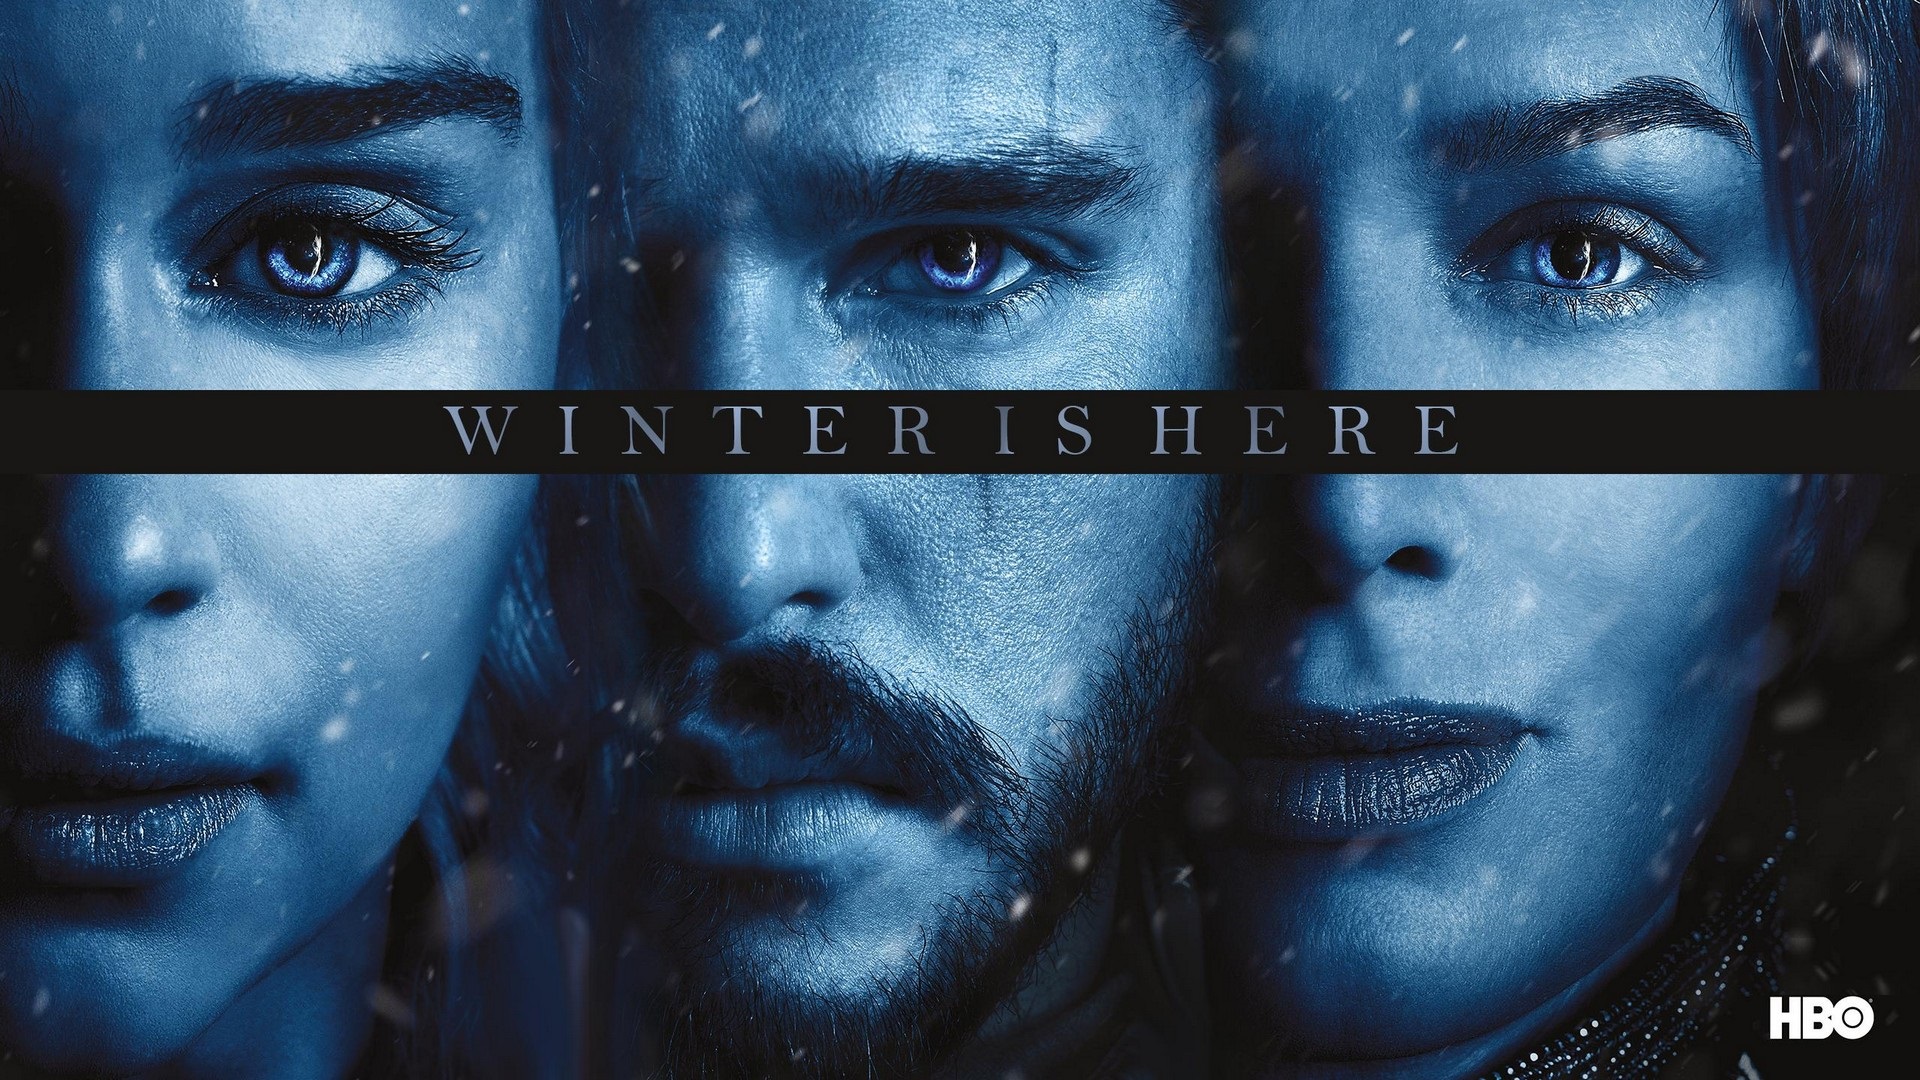 Game of Thrones 8 Season HD Wallpaper with high-resolution 1920x1080 pixel. You can use this wallpaper for your Desktop Computer Backgrounds, Mac Wallpapers, Android Lock screen or iPhone Screensavers and another smartphone device